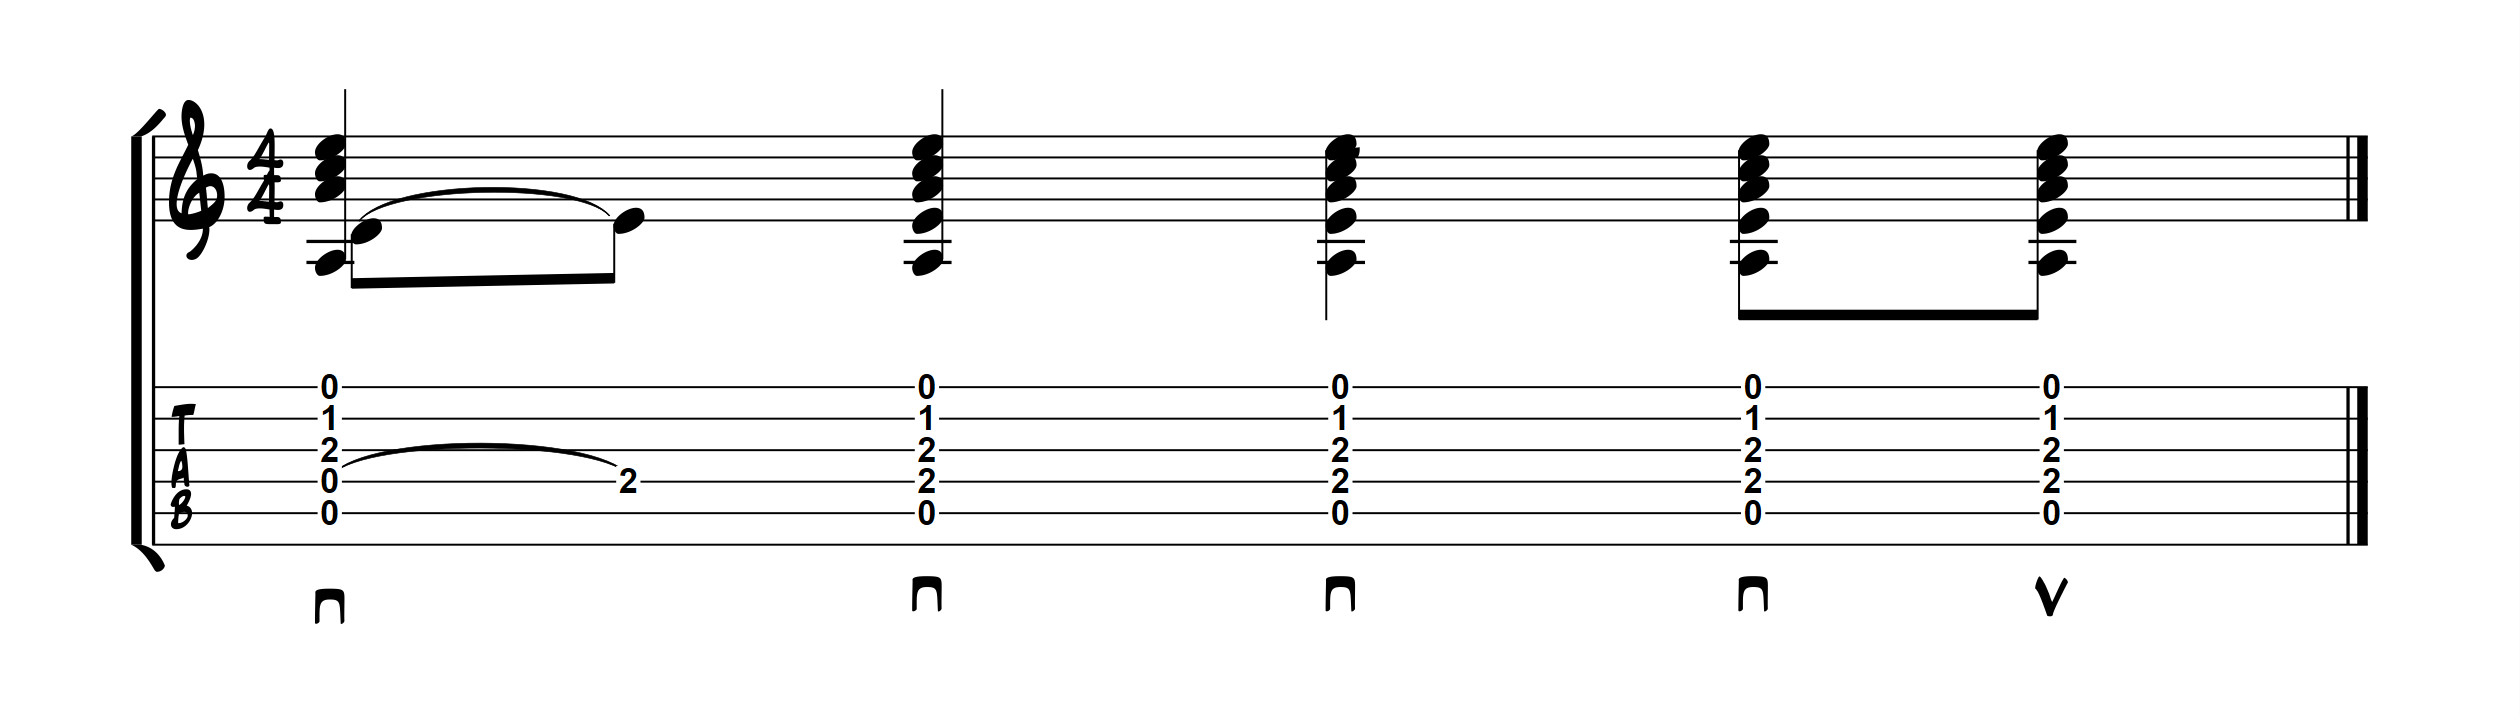 Exemple tablature accords ouverts avec hammer-on